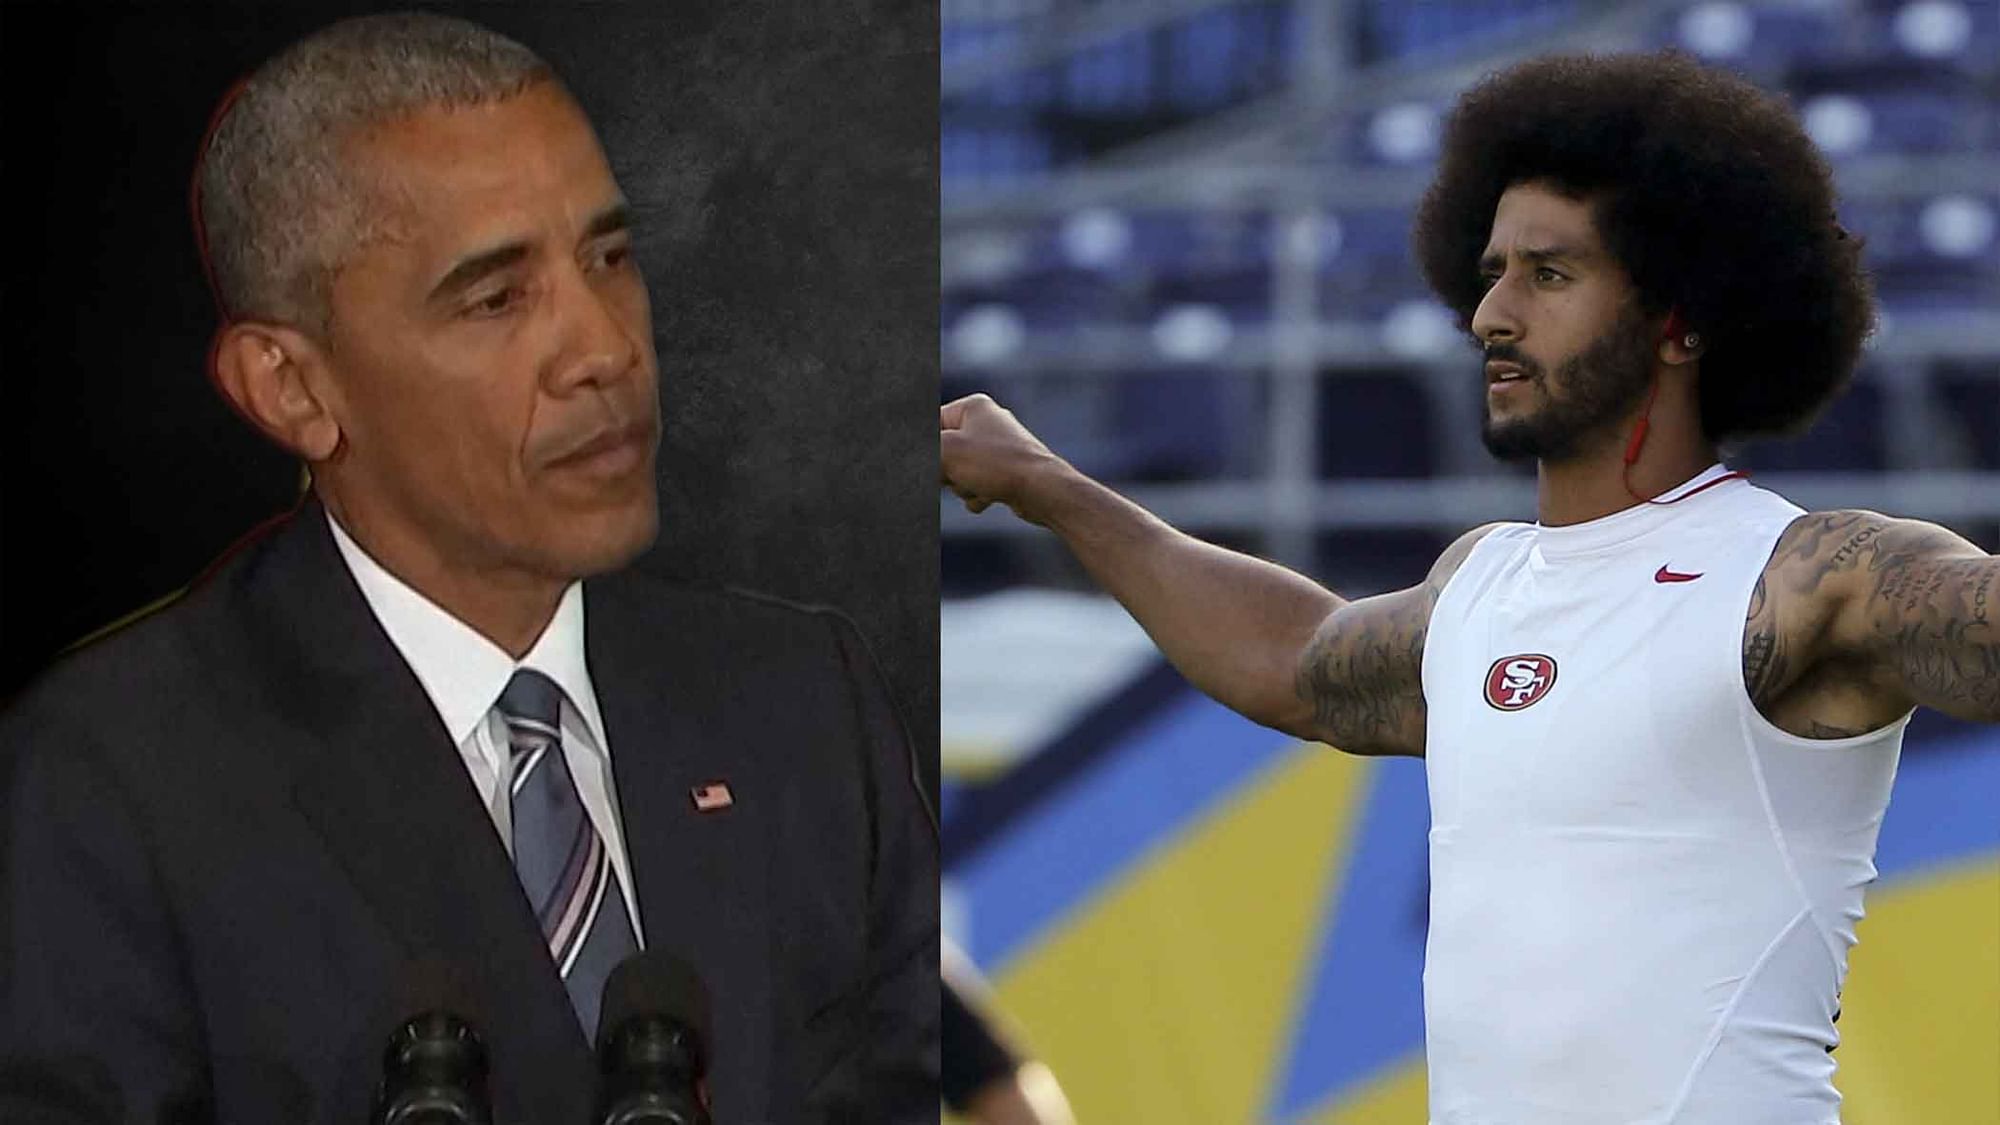 US President Barack Obama and NFL player Colin Kaepernick. (Photo Altered by <b>The Quint</b>)